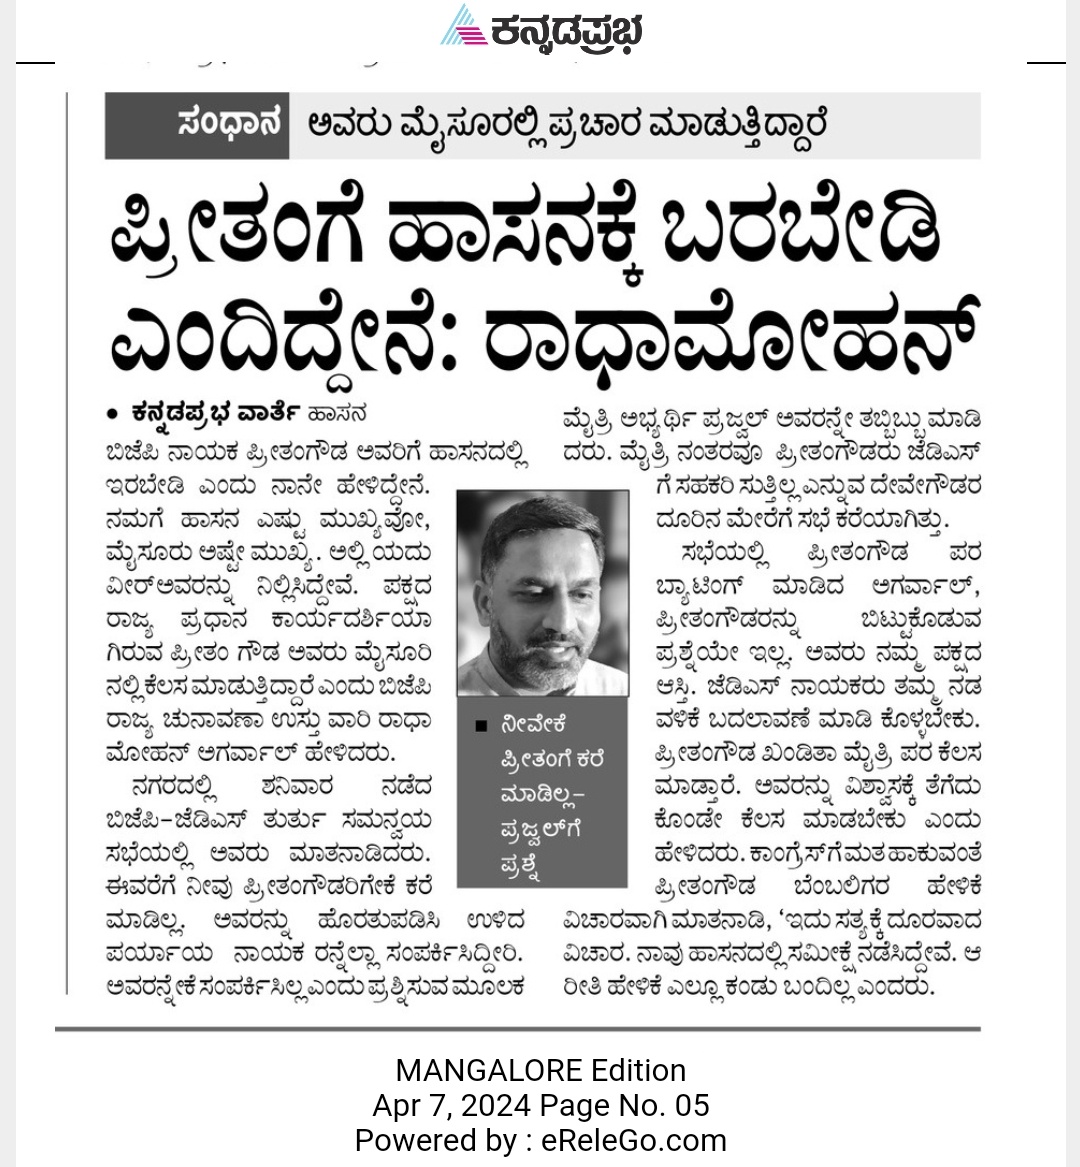 Karnataka BJP in-charge Radha Mohan Agarwal : Have told Preetham Gowda to stay away from Hasana ..... Don't look good here for Prajwal Revanna of JDS ...